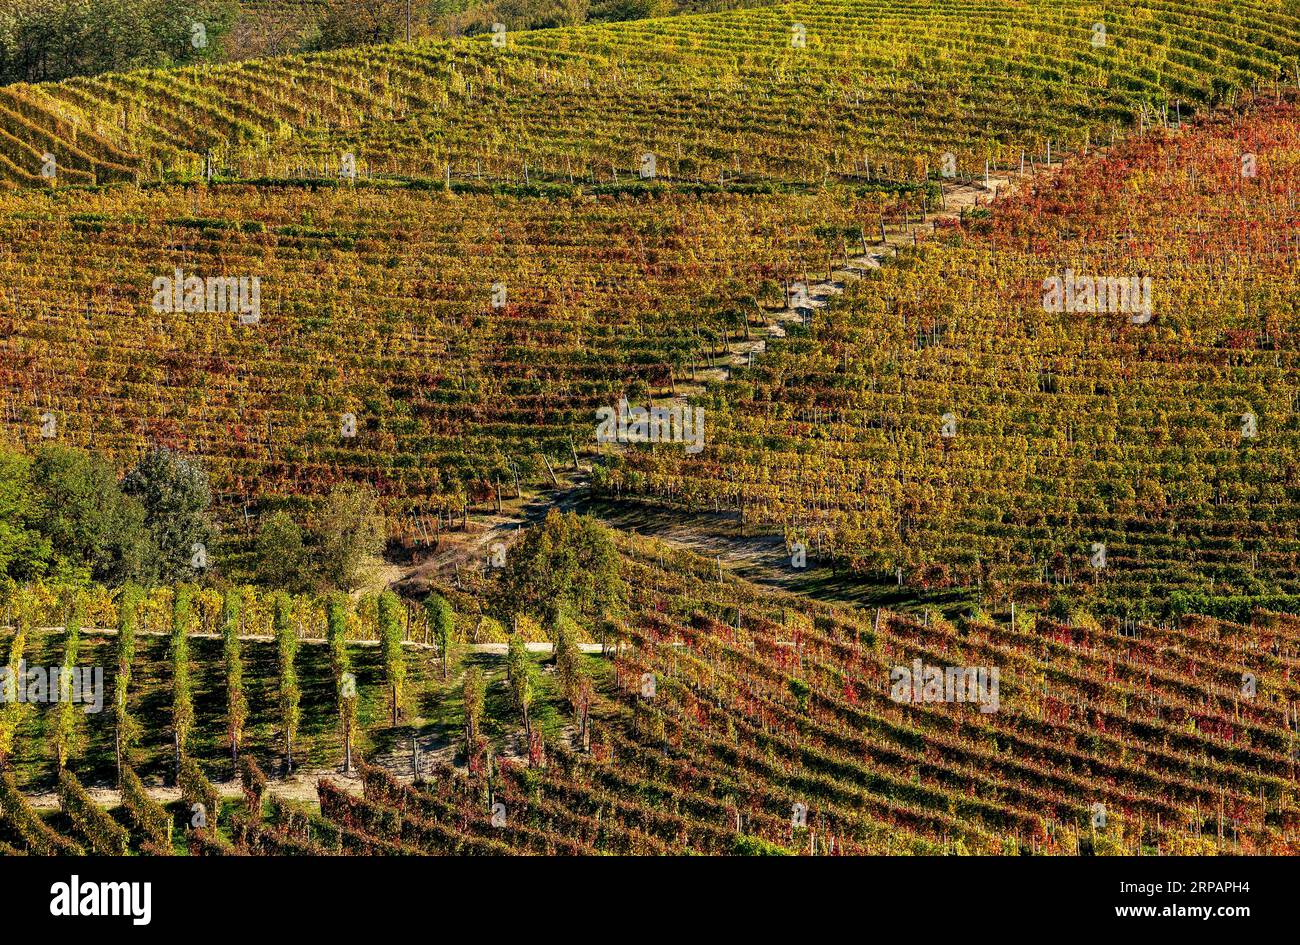 Colorful autumnal vineyards on the hills of Langhe area in Piedmont, North Italy. Stock Photo